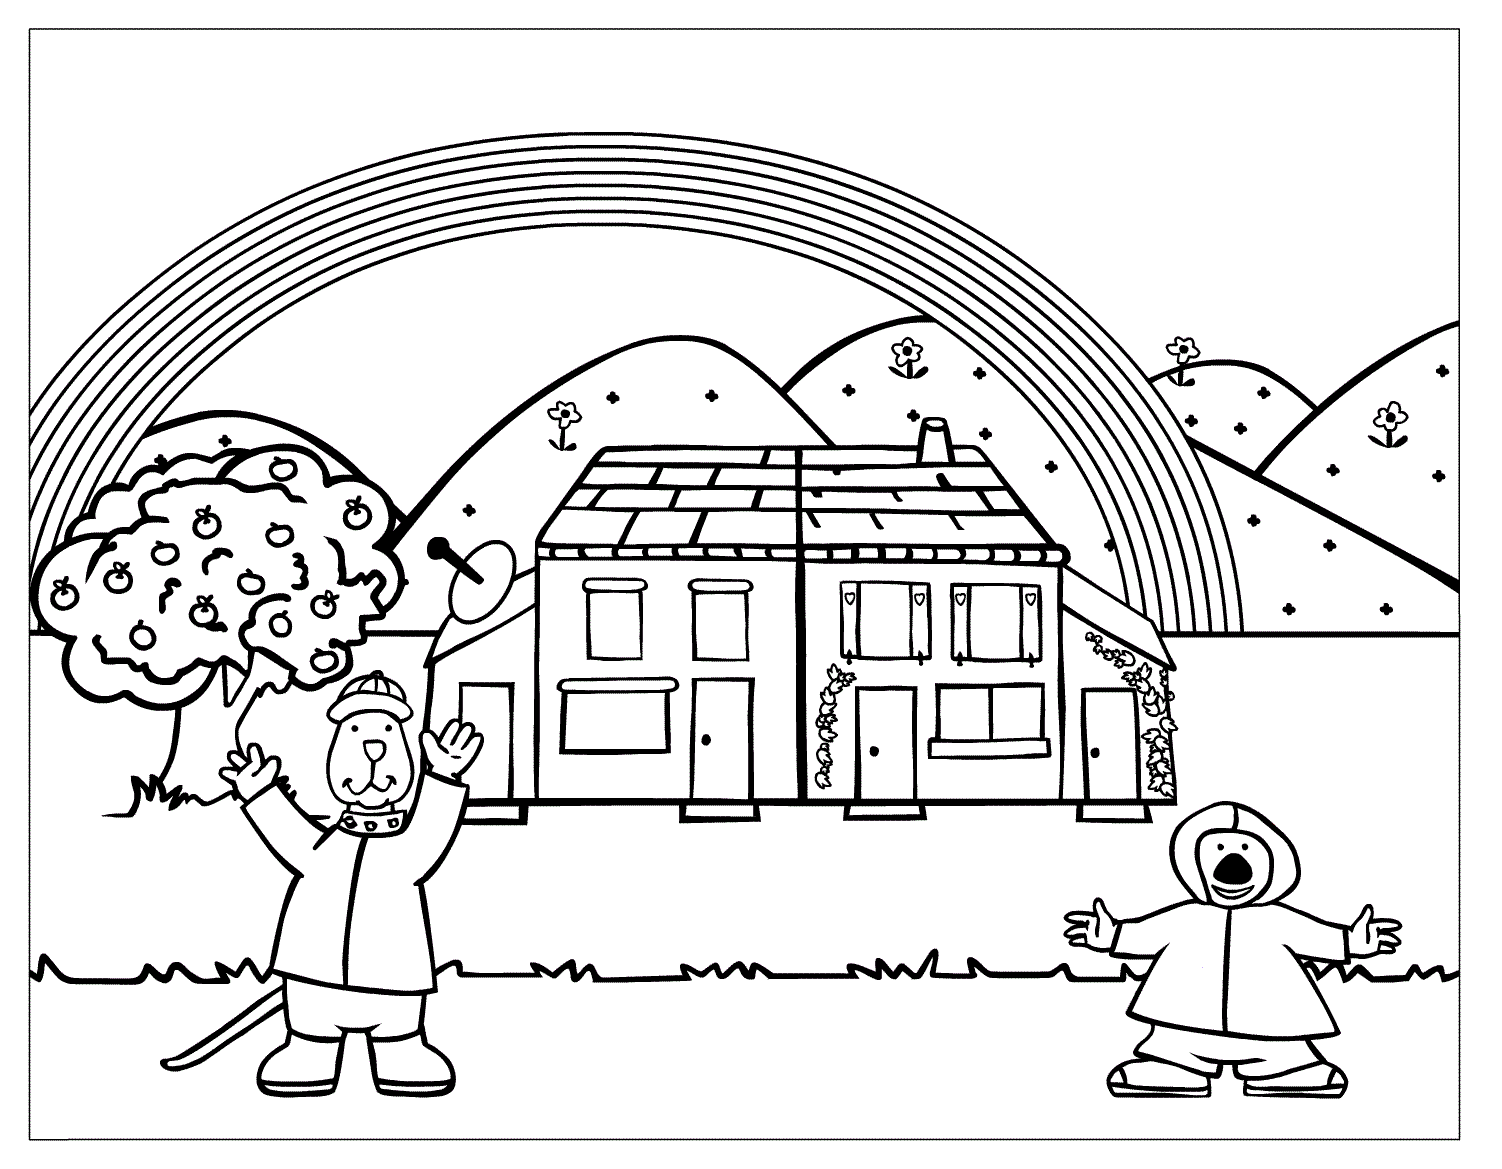 Cartoon Animal Home With Rainbow Coloring Page